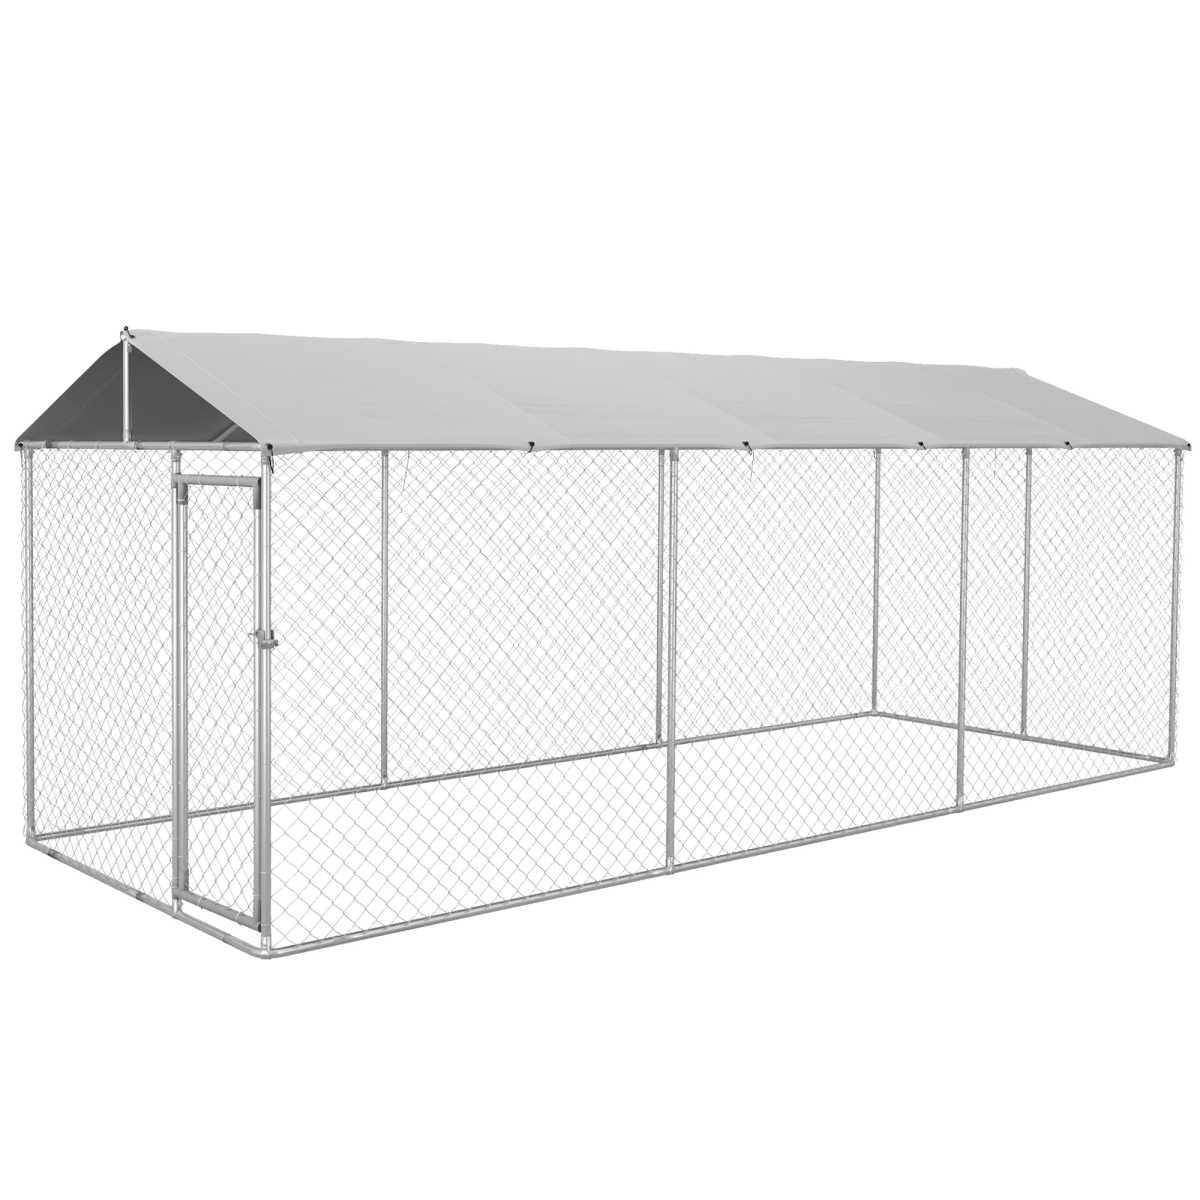 Picture of 212 Main D02-179V02SR 19.7 x 7.5 x 7.5 ft. PawHut Dog Kennel Outdoor for All Breed Dogs with Waterproof UV Resistant Roof&#44; Silver